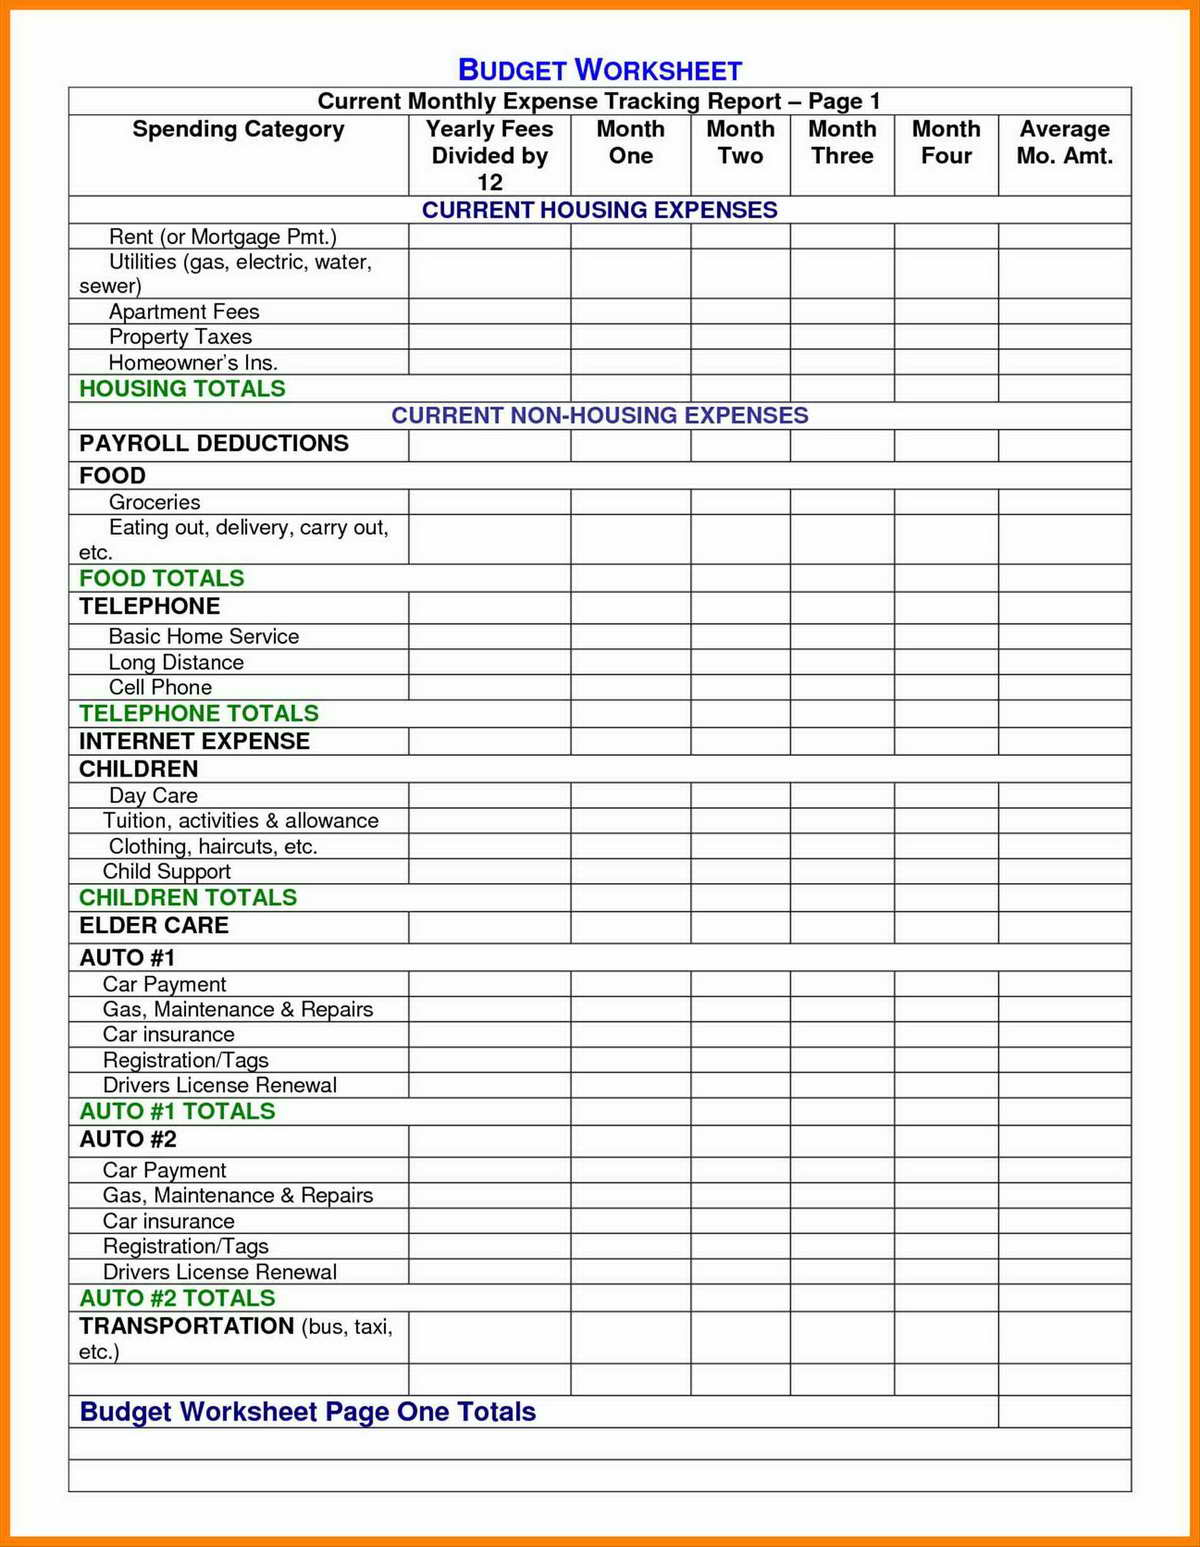 monthly expense report template google sheets